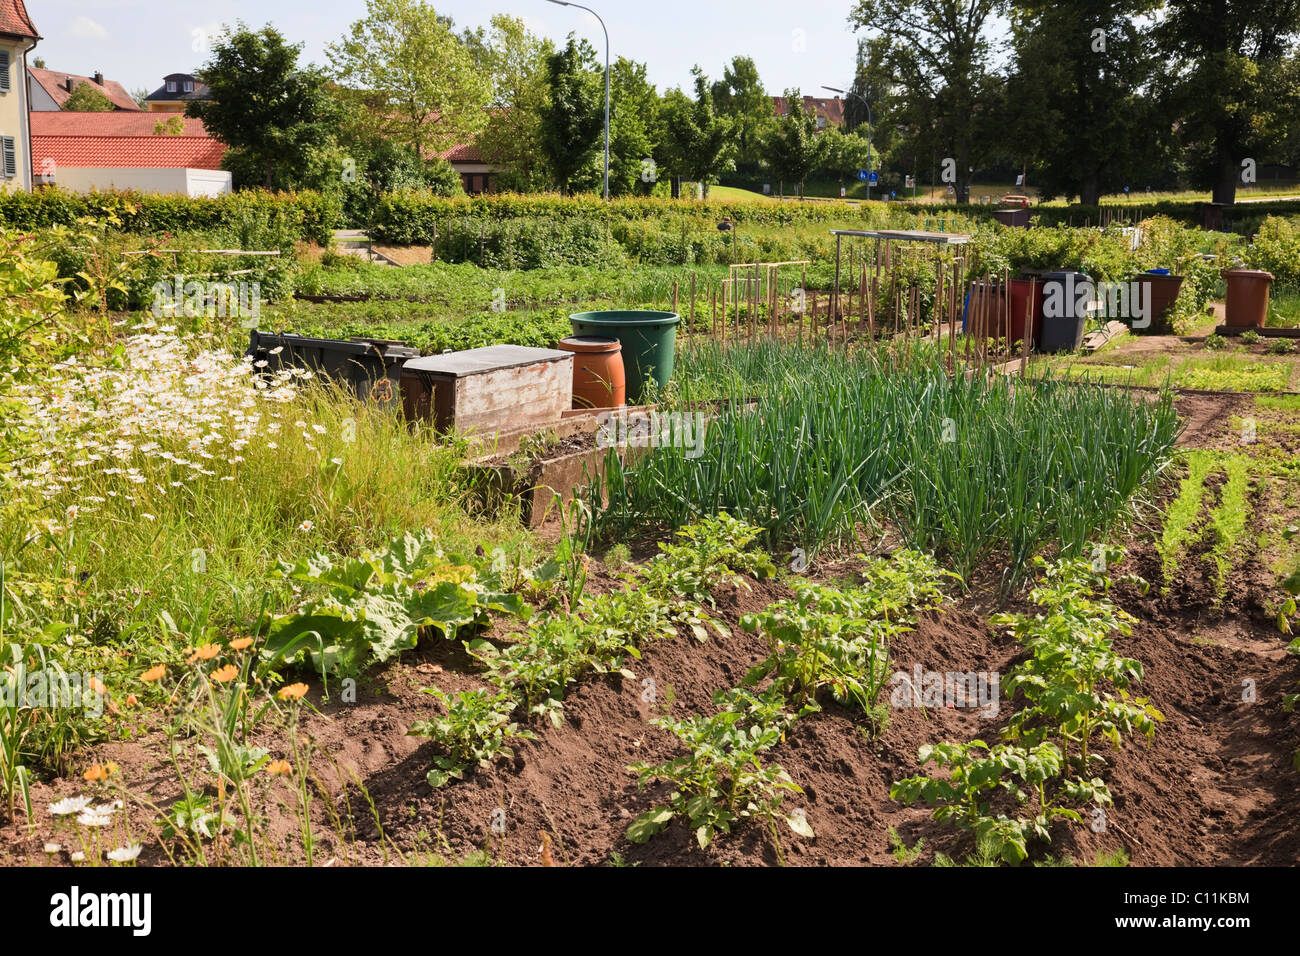 Home grown vegetables growing in allotments with garden plots in Germany. Stock Photo